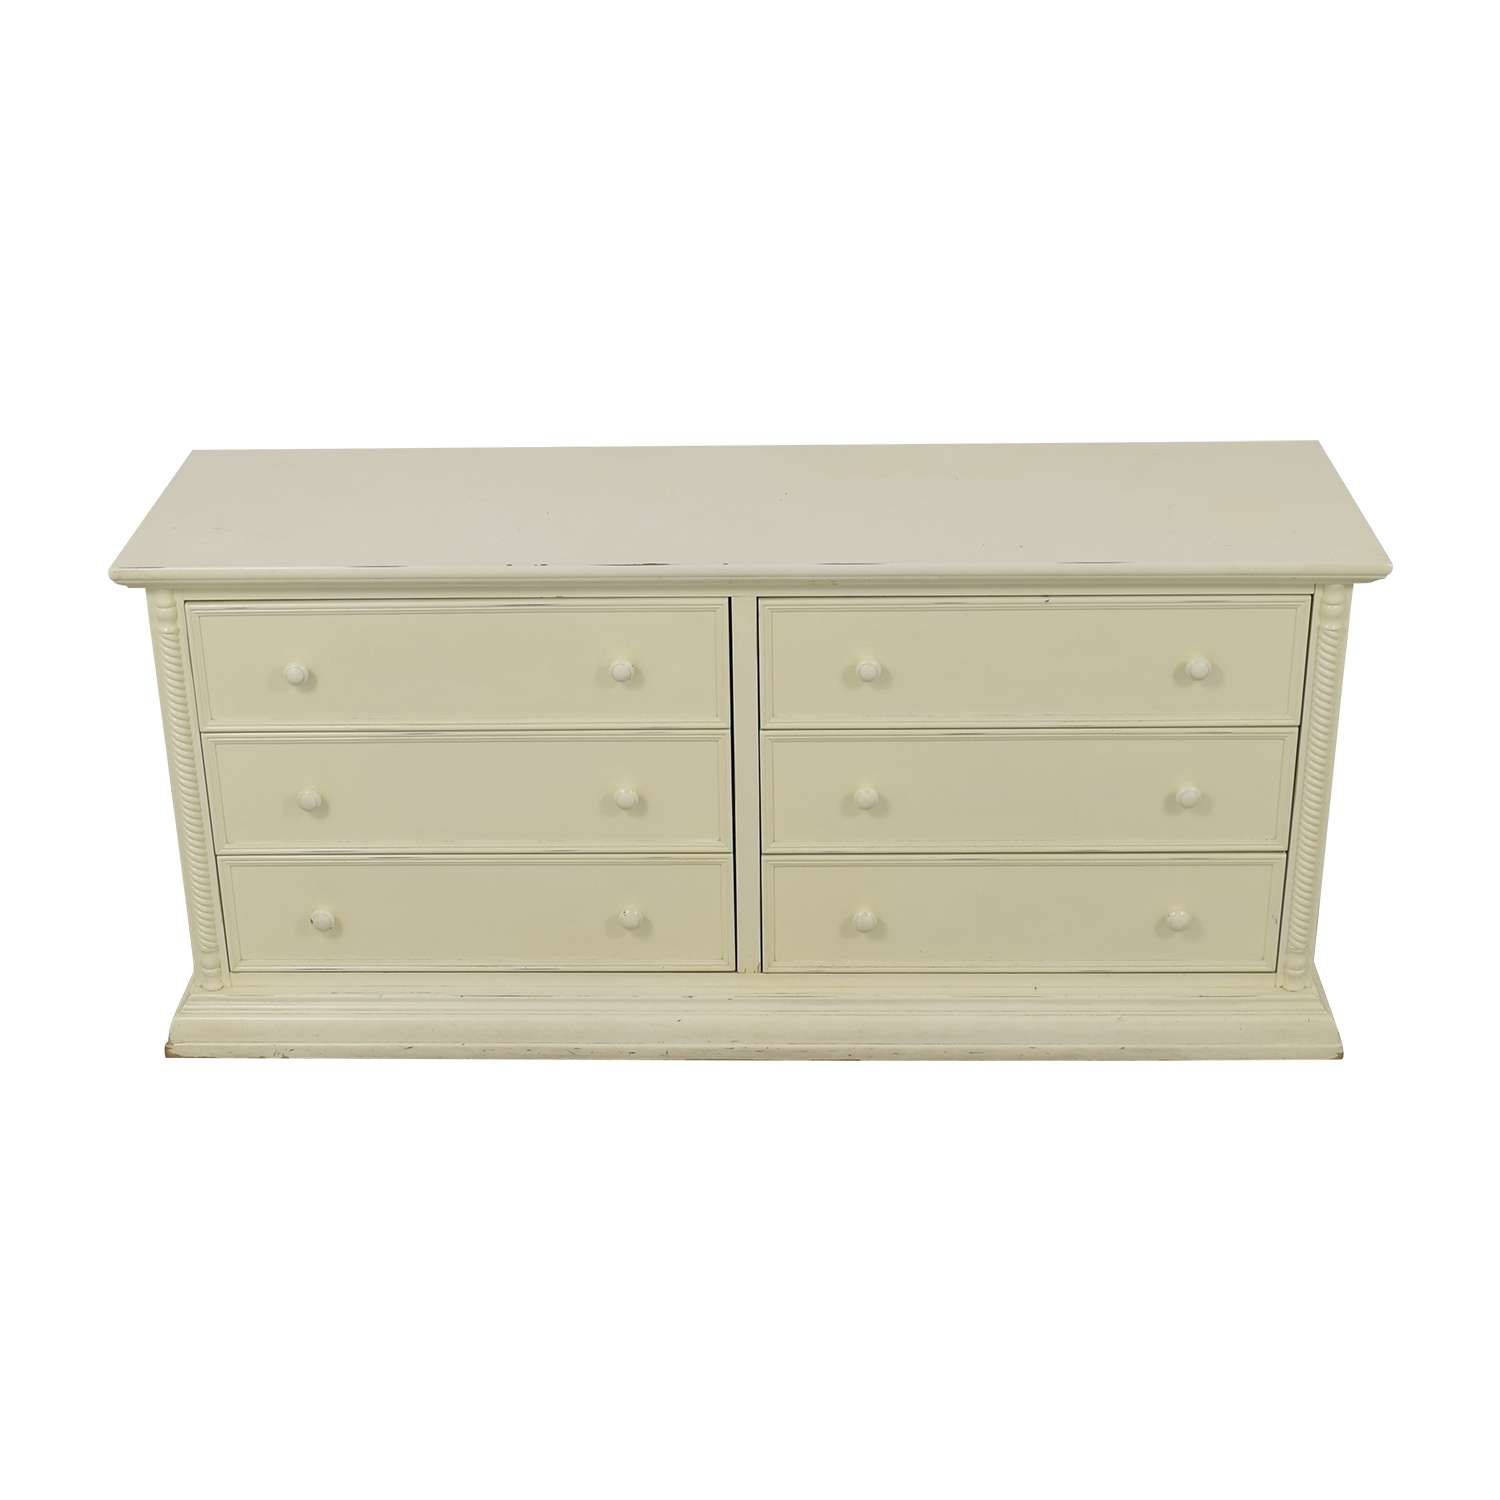 83% Off – Bellini Bellini White Dresser / Storage With Second Hand Dressers And Sideboards (View 2 of 20)